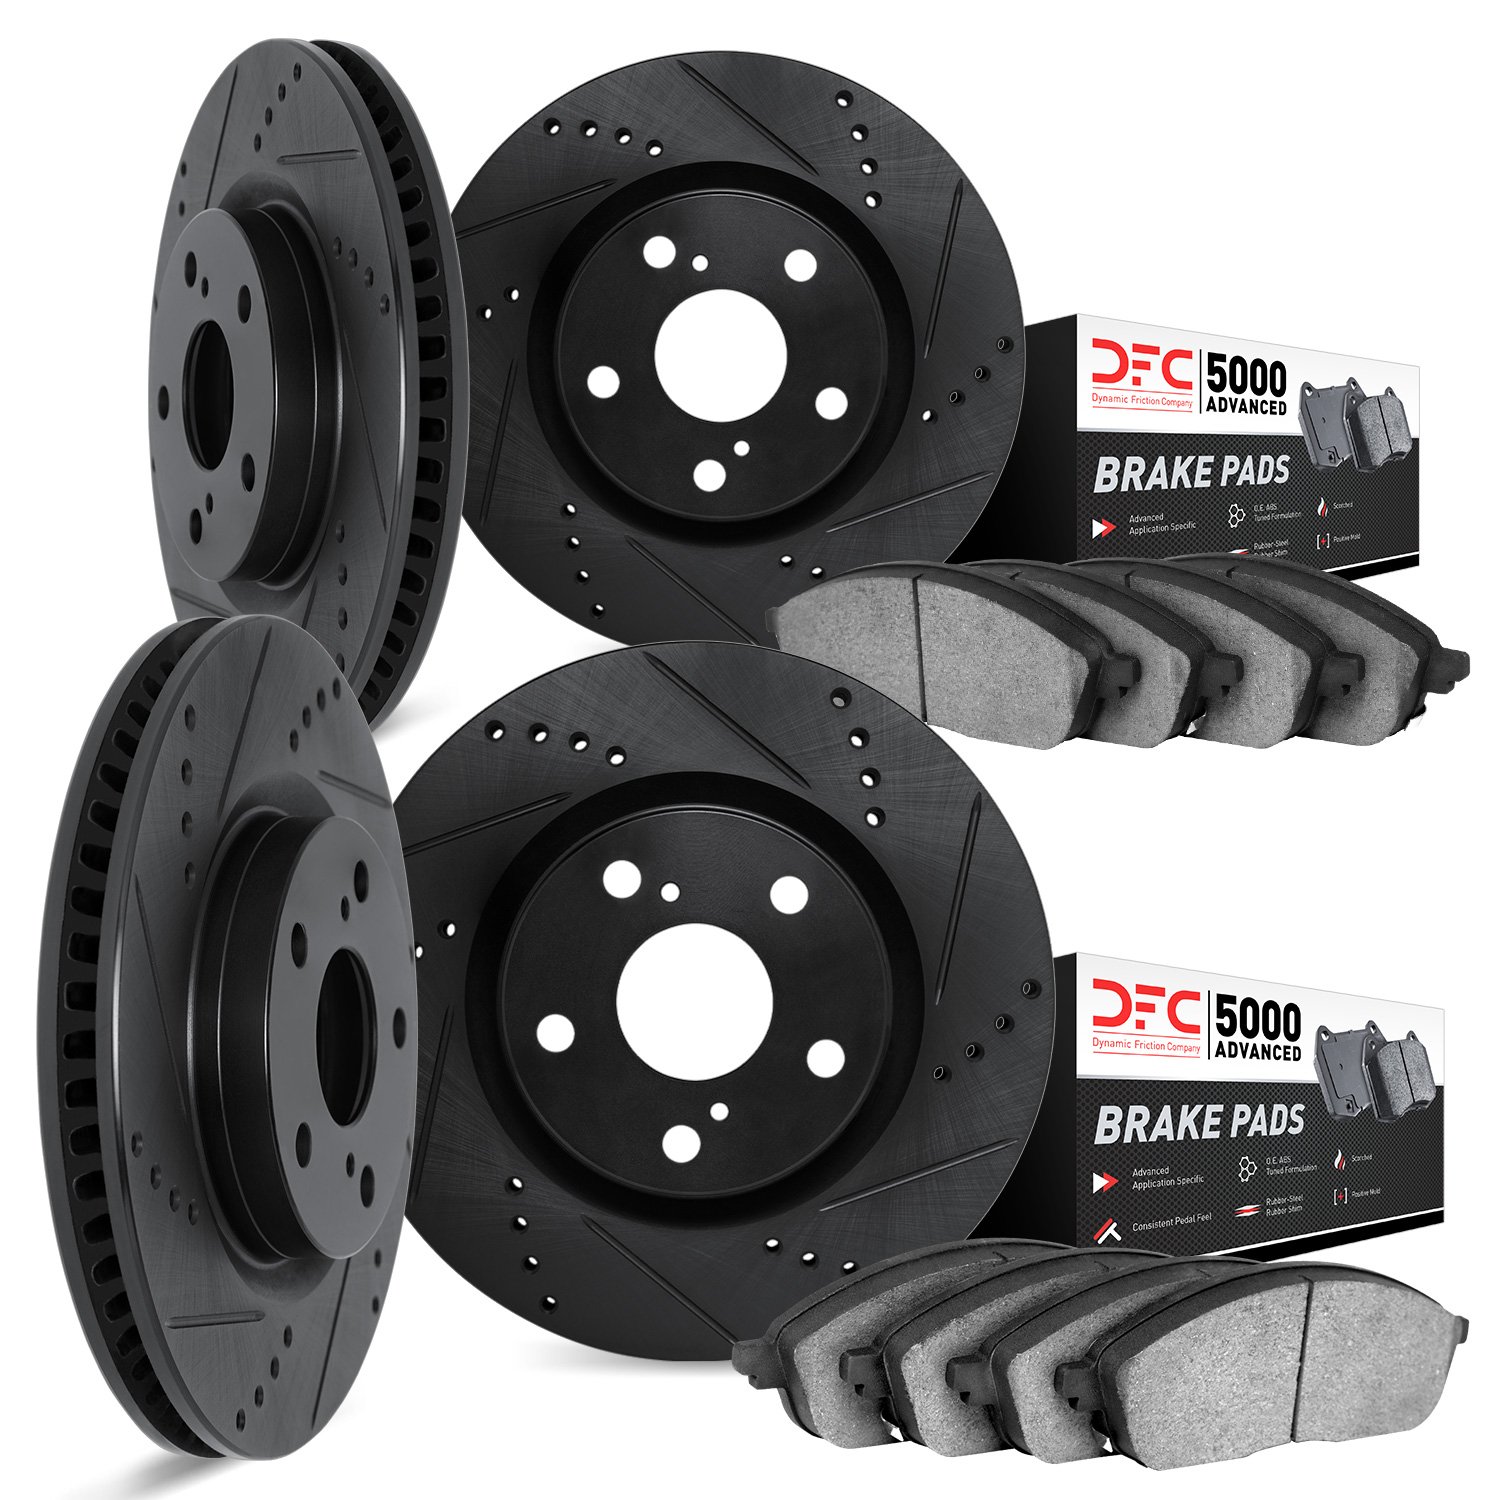 8504-13017 Drilled/Slotted Brake Rotors w/5000 Advanced Brake Pads Kit [Black], 2015-2021 Subaru, Position: Front and Rear